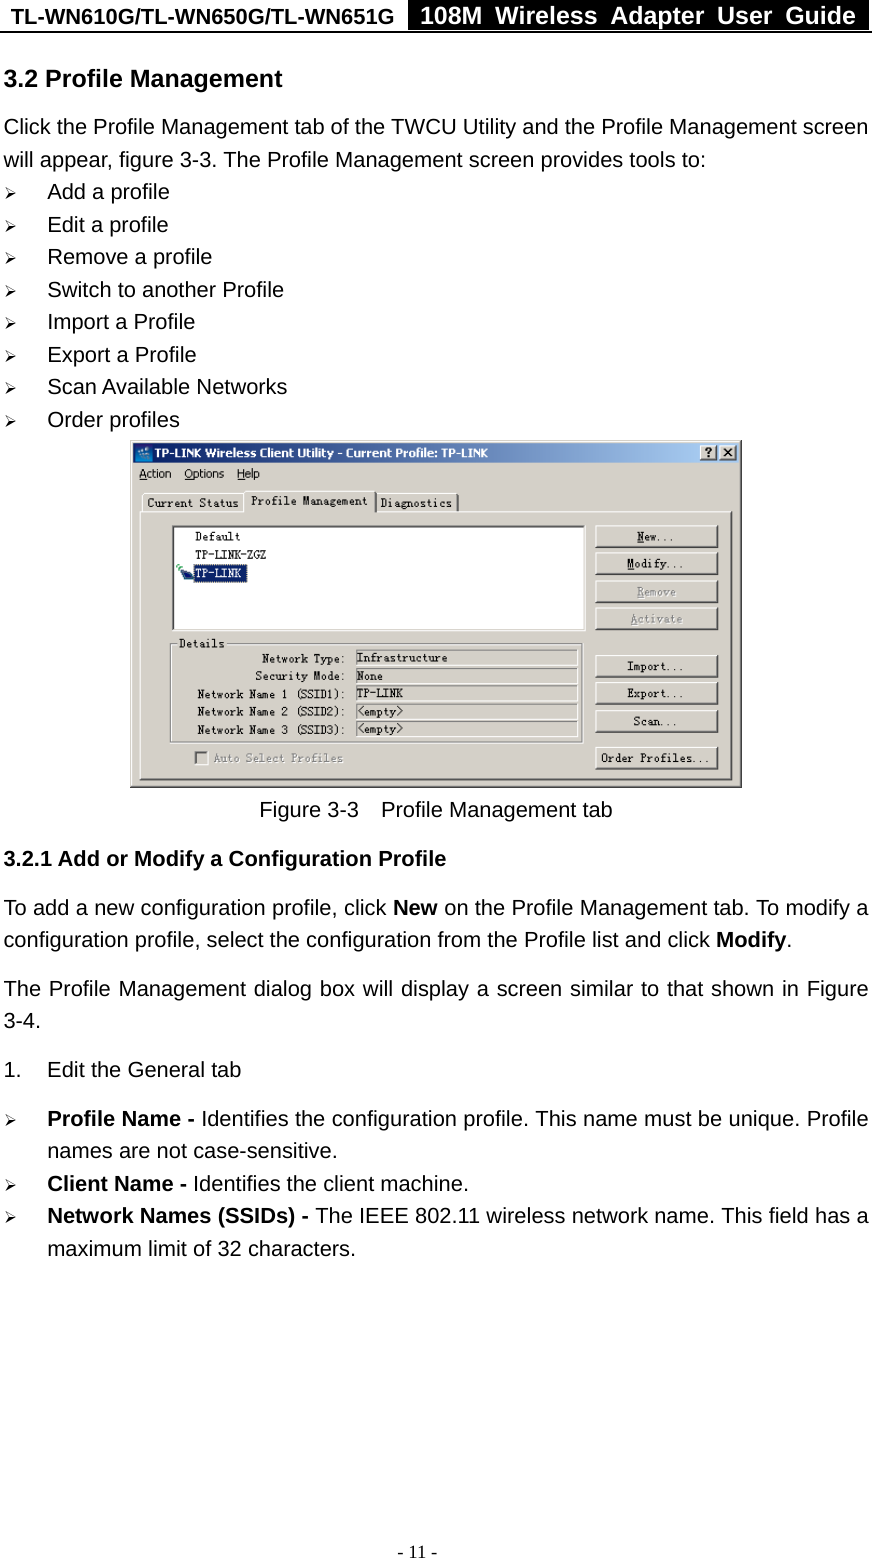 TL-WN610G/TL-WN650G/TL-WN651G  108M Wireless Adapter User Guide  - 11 - 3.2 Profile Management Click the Profile Management tab of the TWCU Utility and the Profile Management screen will appear, figure 3-3. The Profile Management screen provides tools to: ¾ Add a profile ¾ Edit a profile ¾ Remove a profile ¾ Switch to another Profile ¾ Import a Profile ¾ Export a Profile ¾ Scan Available Networks ¾ Order profiles   Figure 3-3    Profile Management tab 3.2.1 Add or Modify a Configuration Profile To add a new configuration profile, click New on the Profile Management tab. To modify a configuration profile, select the configuration from the Profile list and click Modify. The Profile Management dialog box will display a screen similar to that shown in Figure 3-4. 1.  Edit the General tab ¾ Profile Name - Identifies the configuration profile. This name must be unique. Profile names are not case-sensitive. ¾ Client Name - Identifies the client machine. ¾ Network Names (SSIDs) - The IEEE 802.11 wireless network name. This field has a maximum limit of 32 characters. 